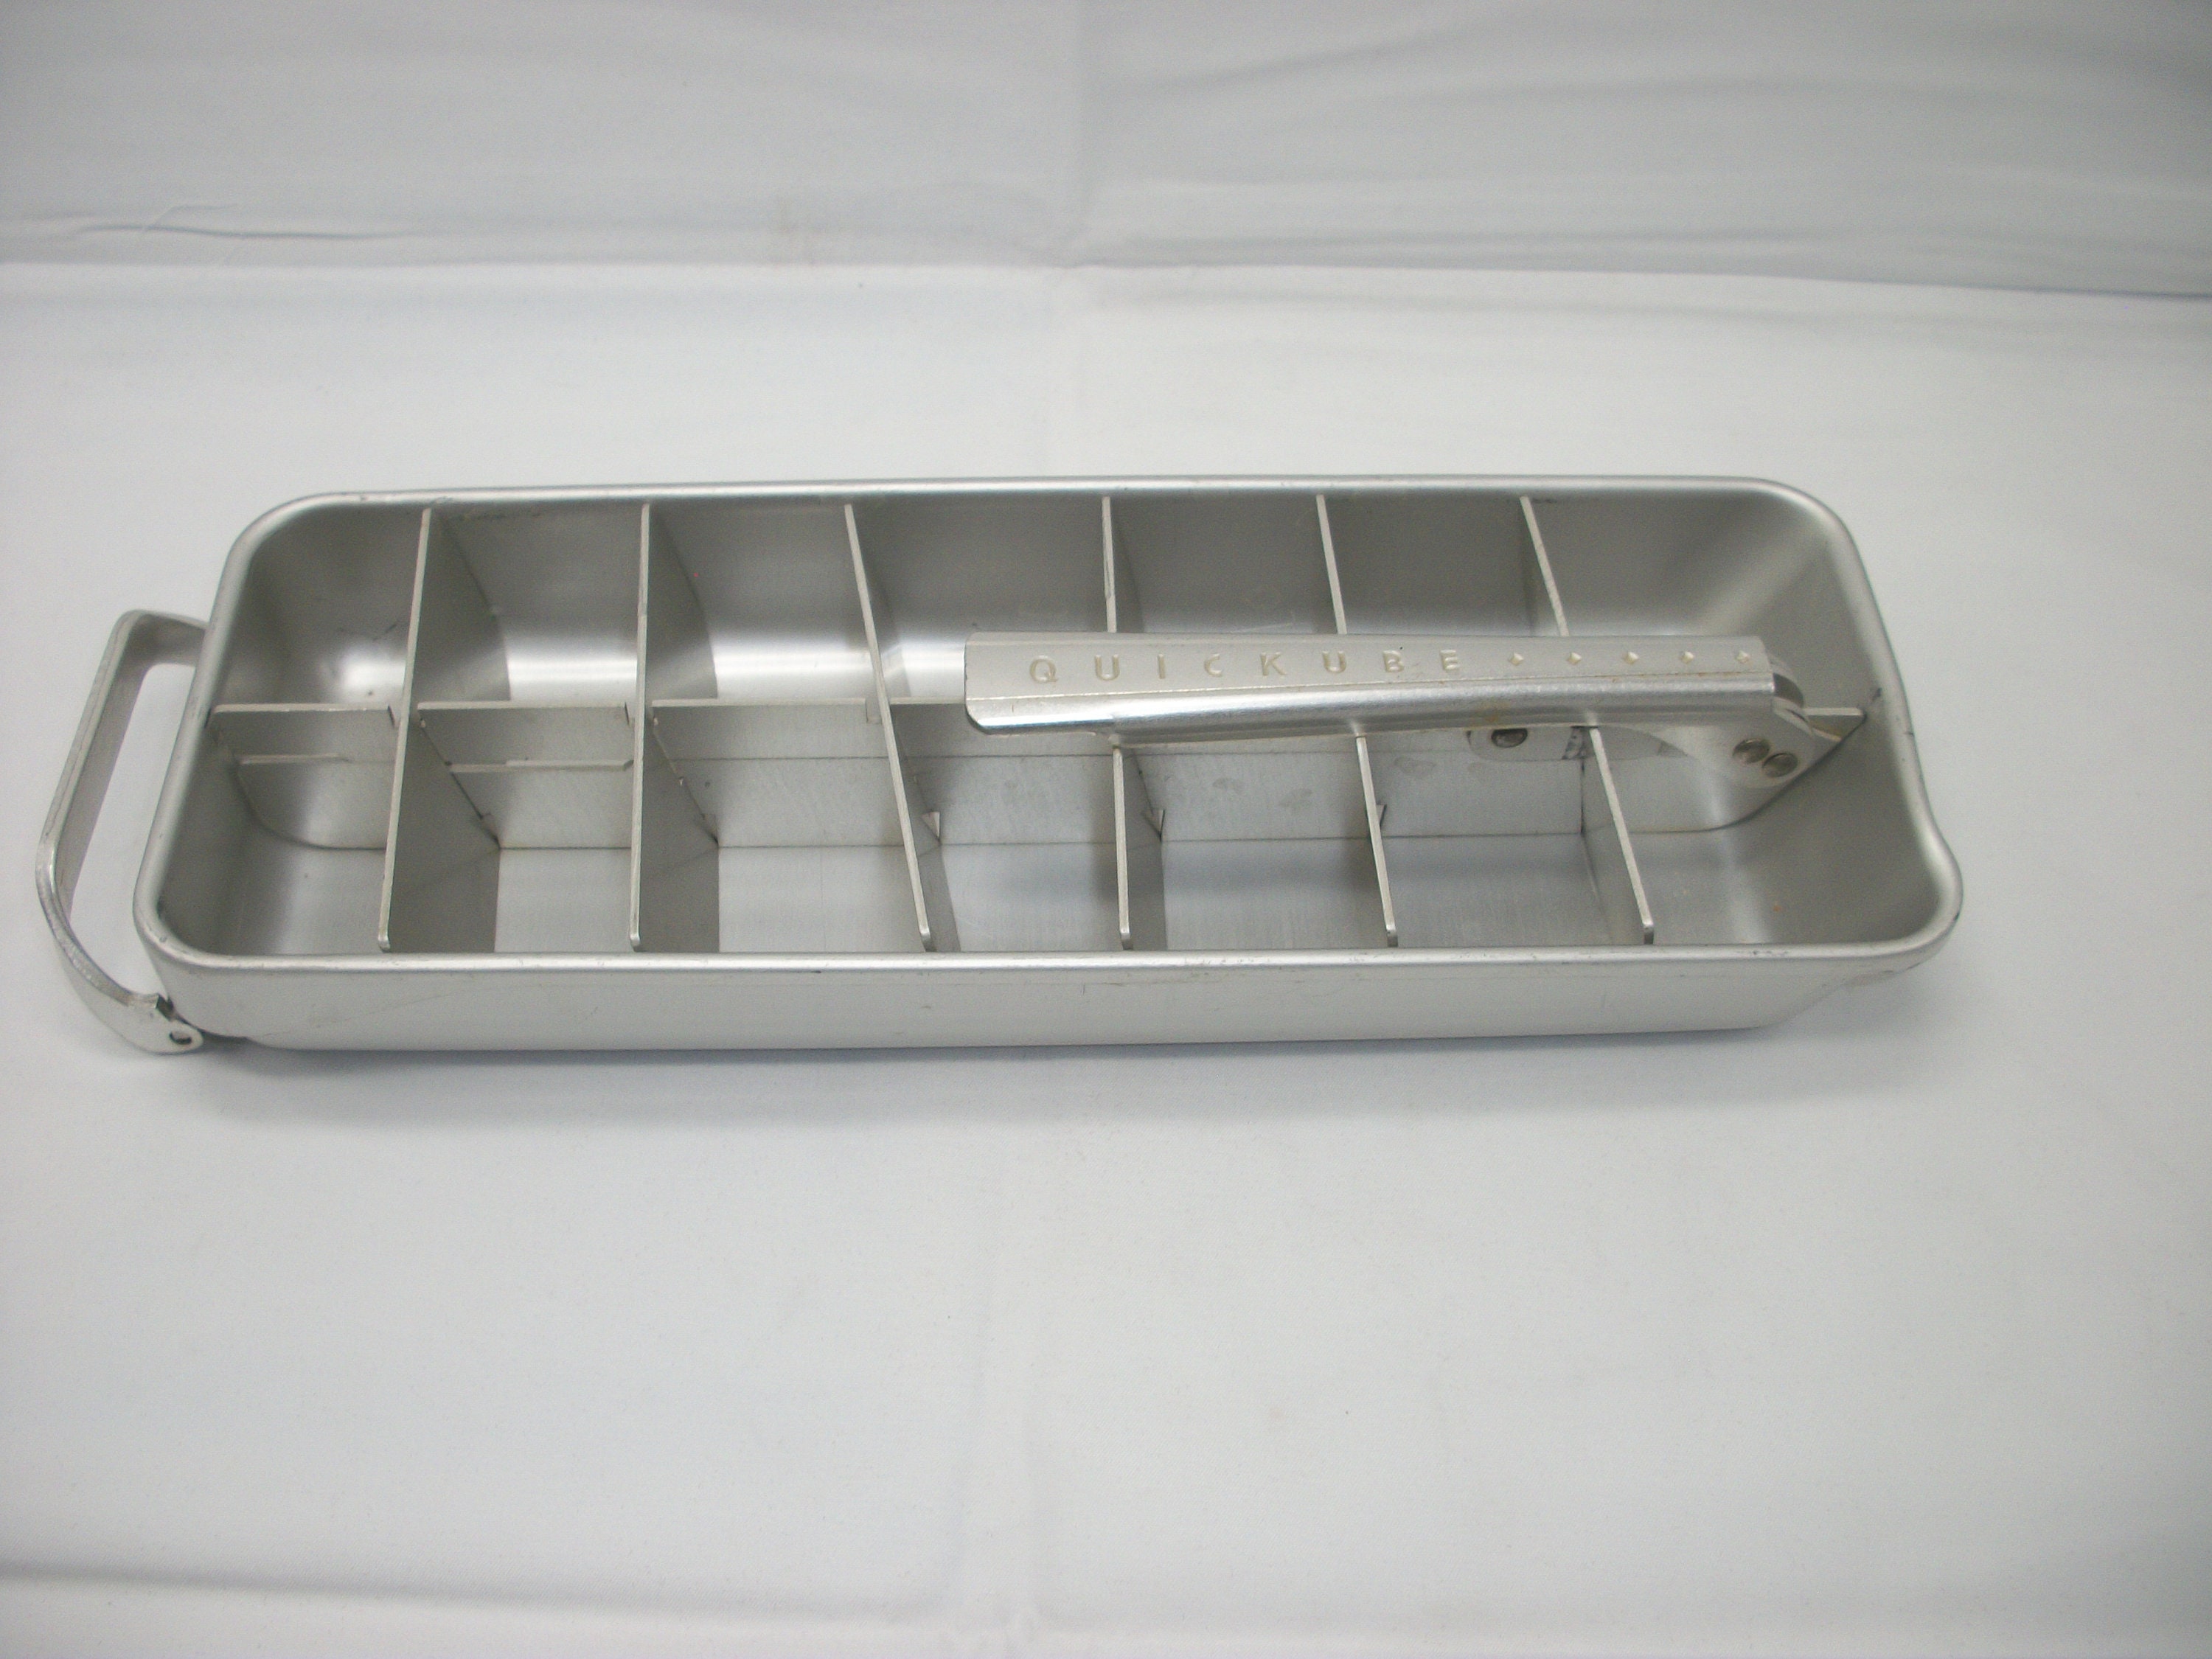 Vintage Kitchen Ice Cube Tray – 18 Slot Ice Cube Maker with Easy Release  Handle – Aluminum Metal – 11” L x 4” W x 1 ¾” H